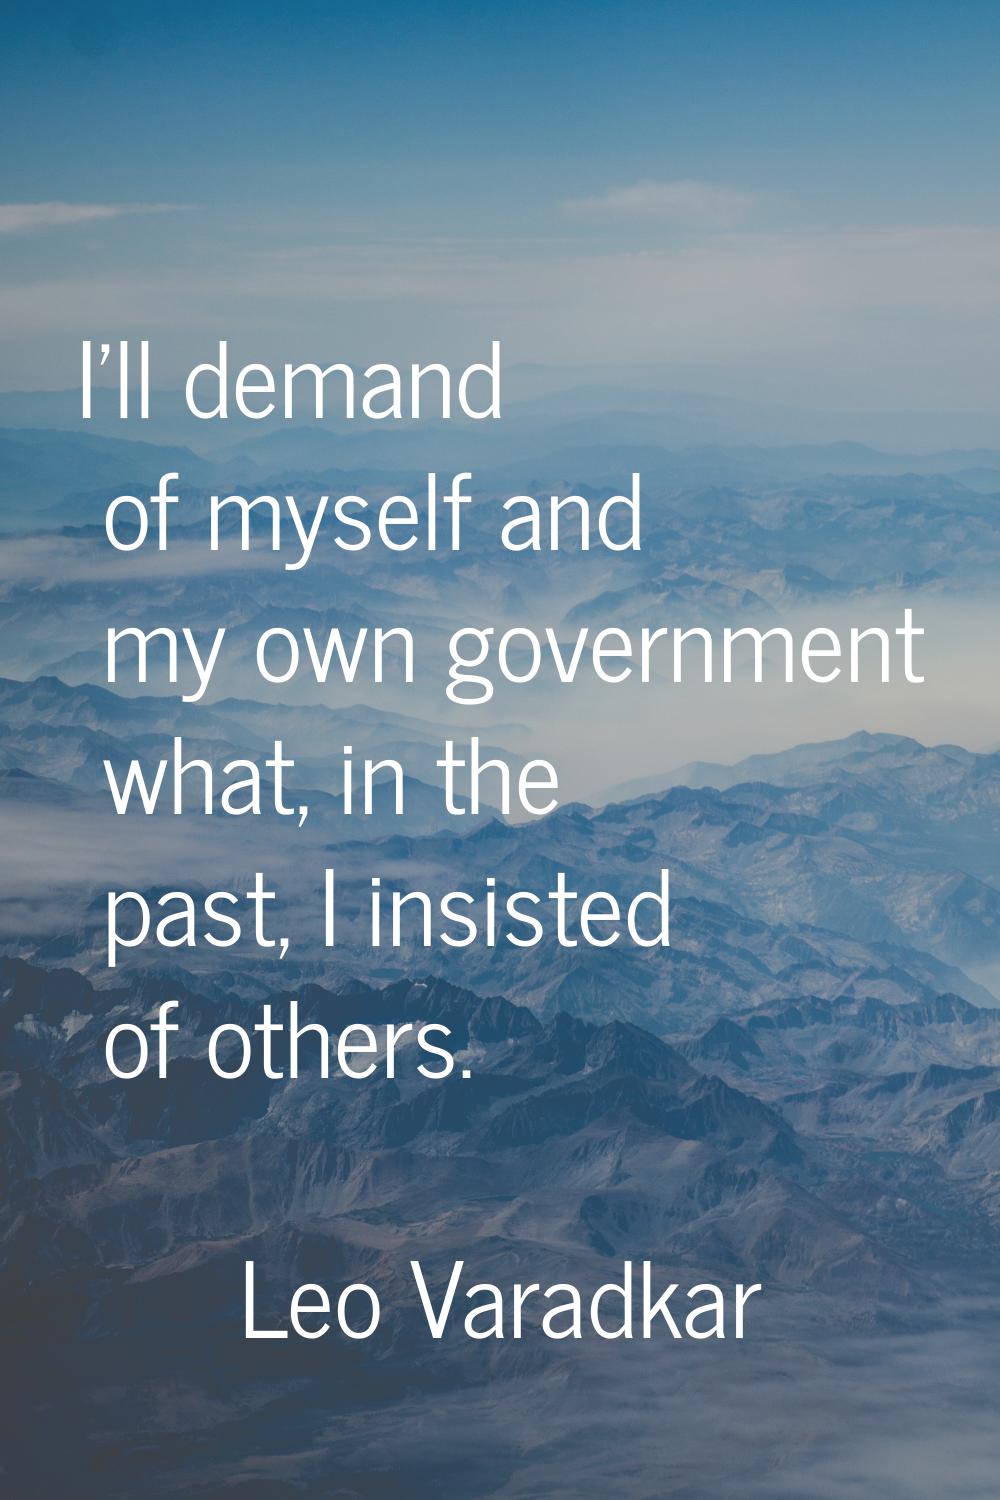 I'll demand of myself and my own government what, in the past, I insisted of others.